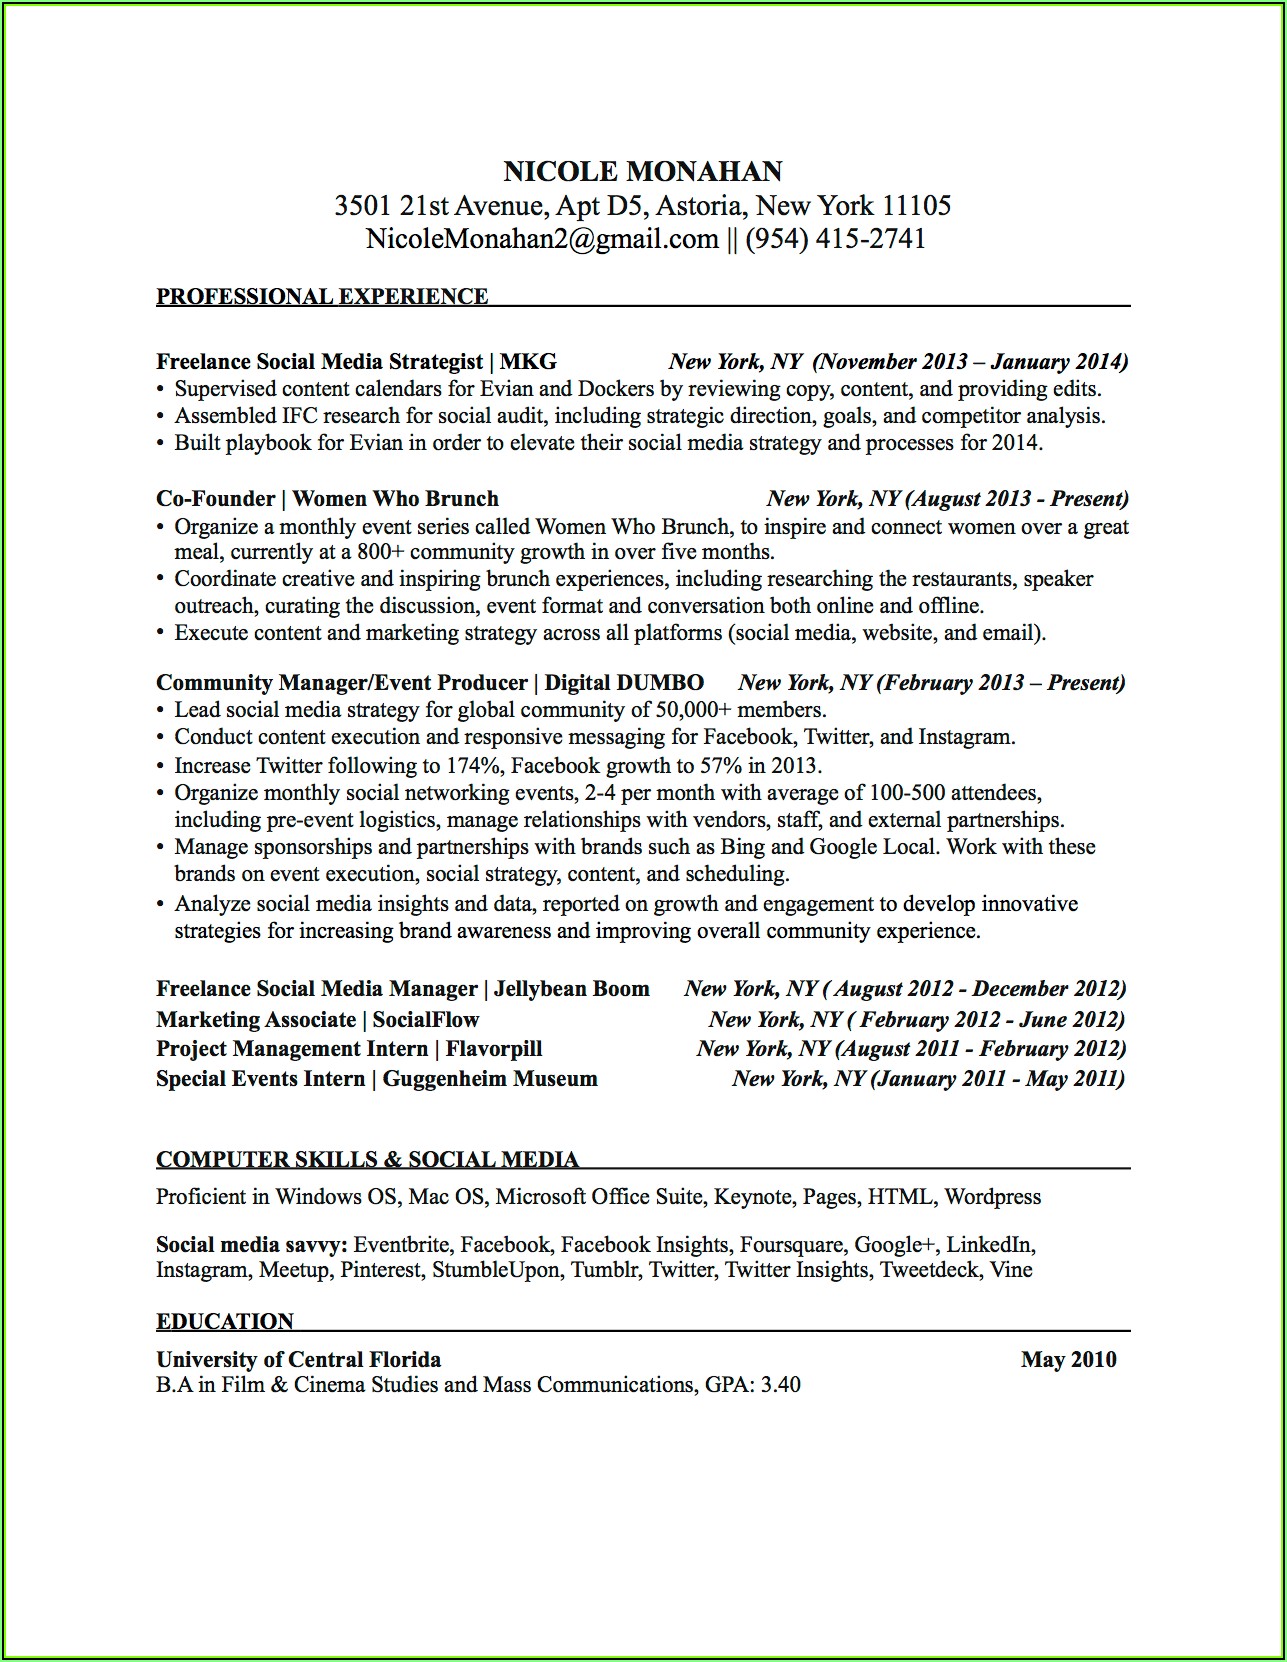 Updated Resume Format Free Download